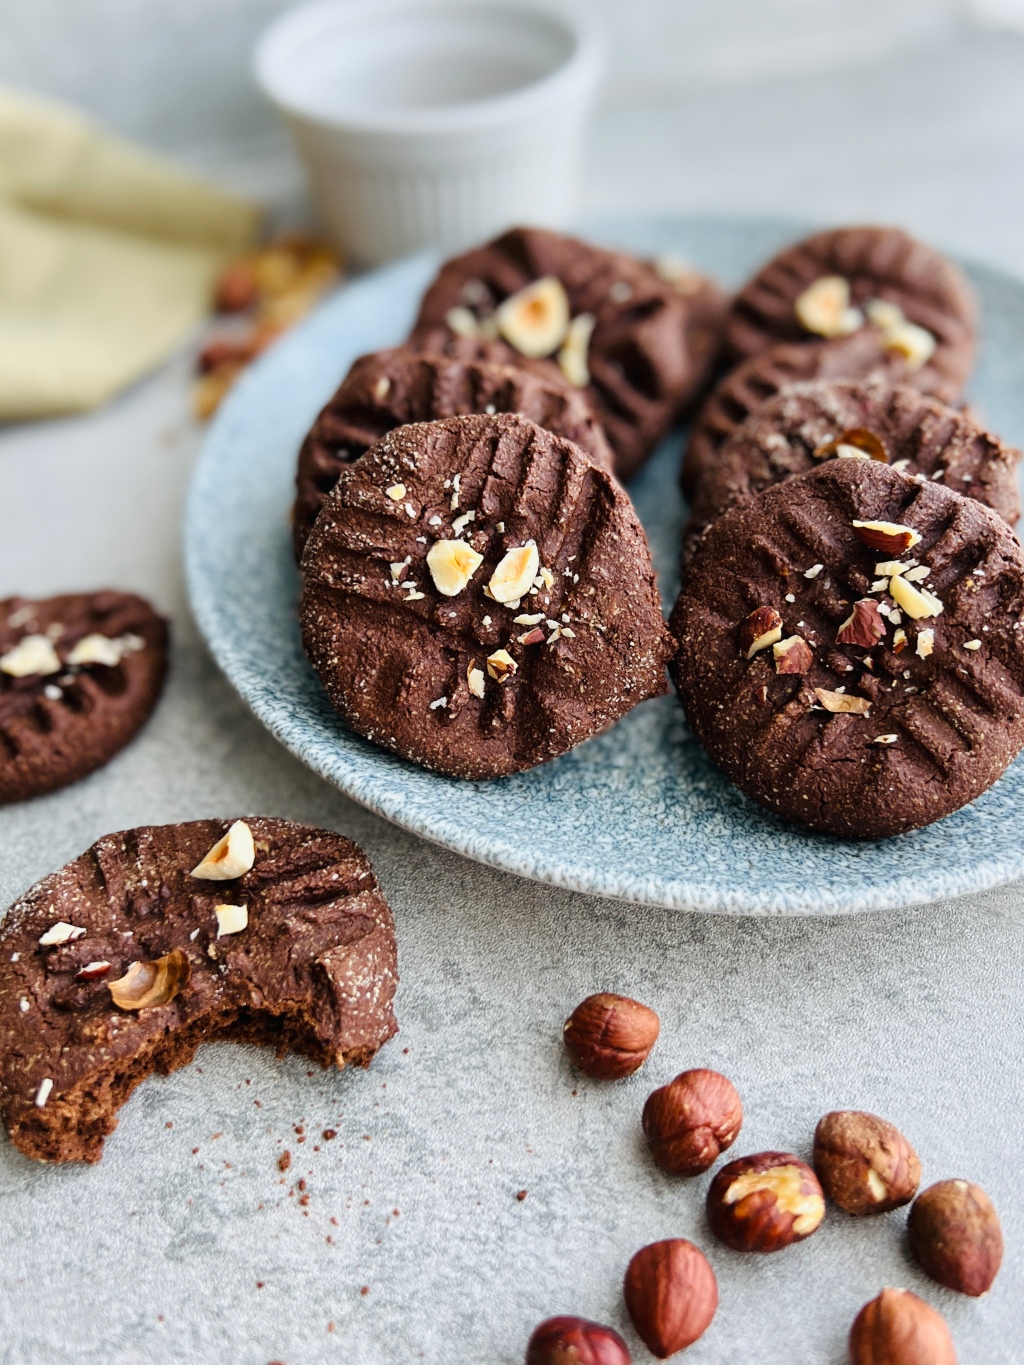 Chocolate Cookies with Hazelnuts